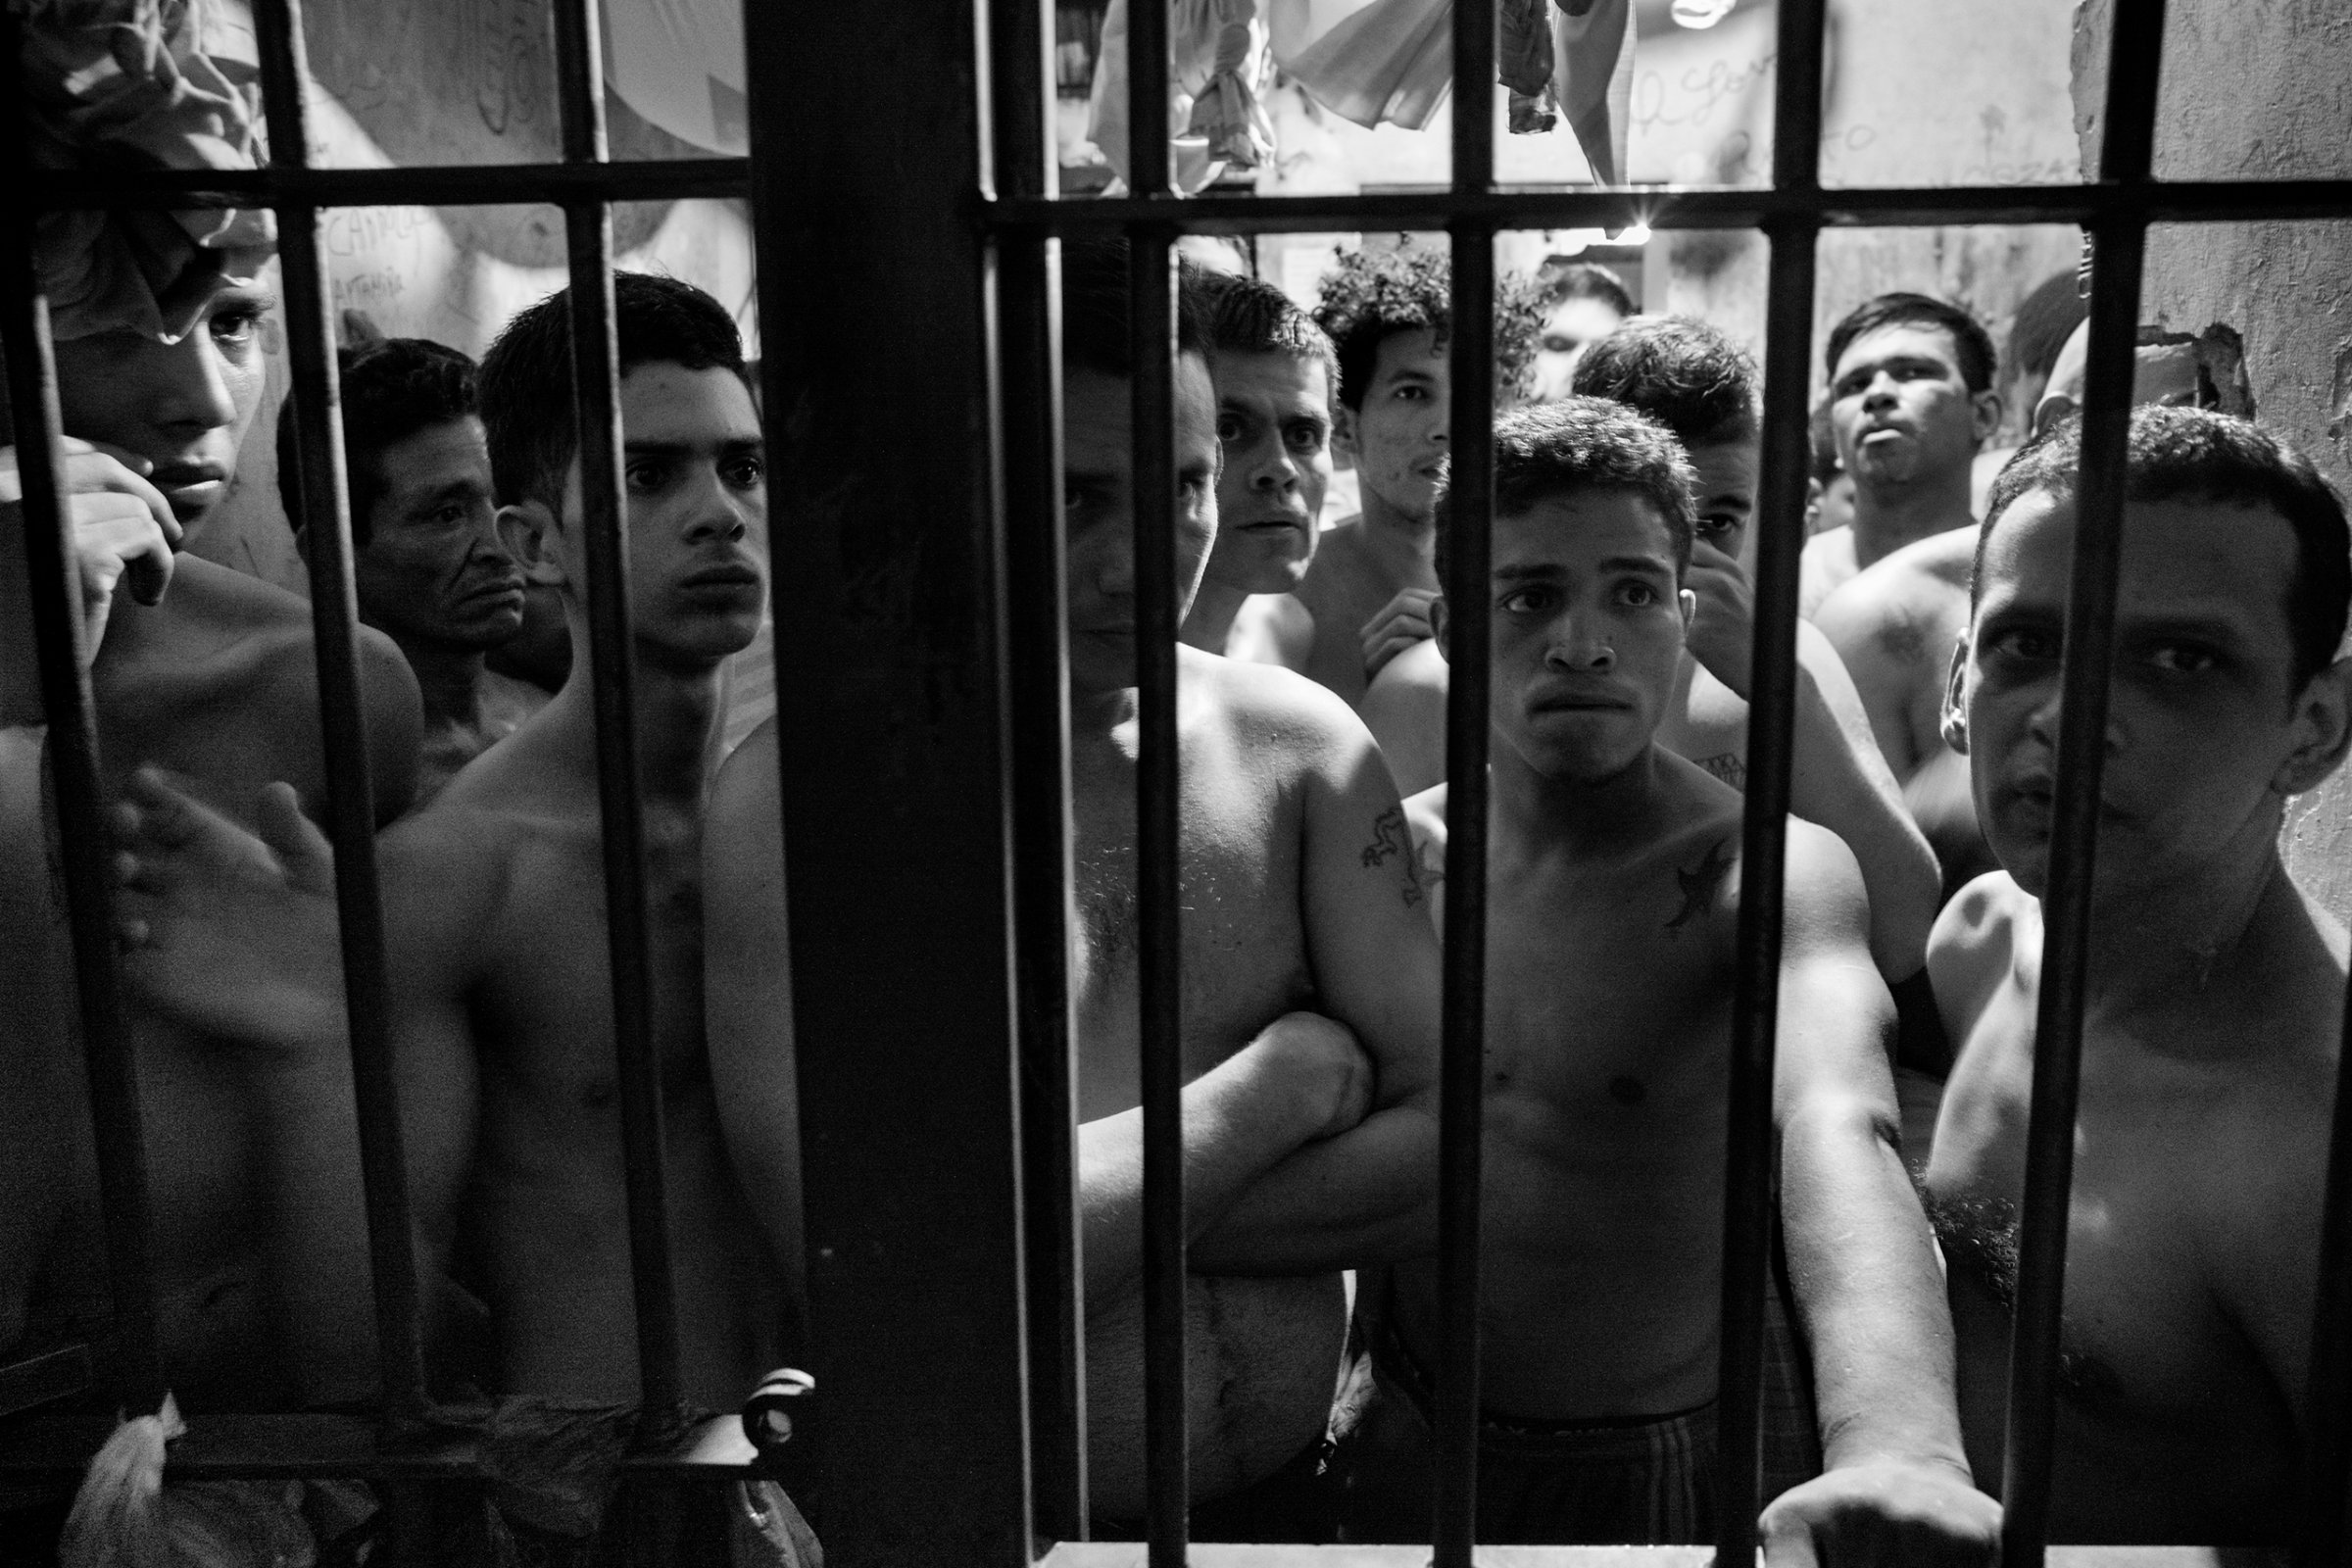 A group of prisoners locked in their cells inside the municipal police station of Chacao, east of Caracas, Venezuela, May 27, 2016.